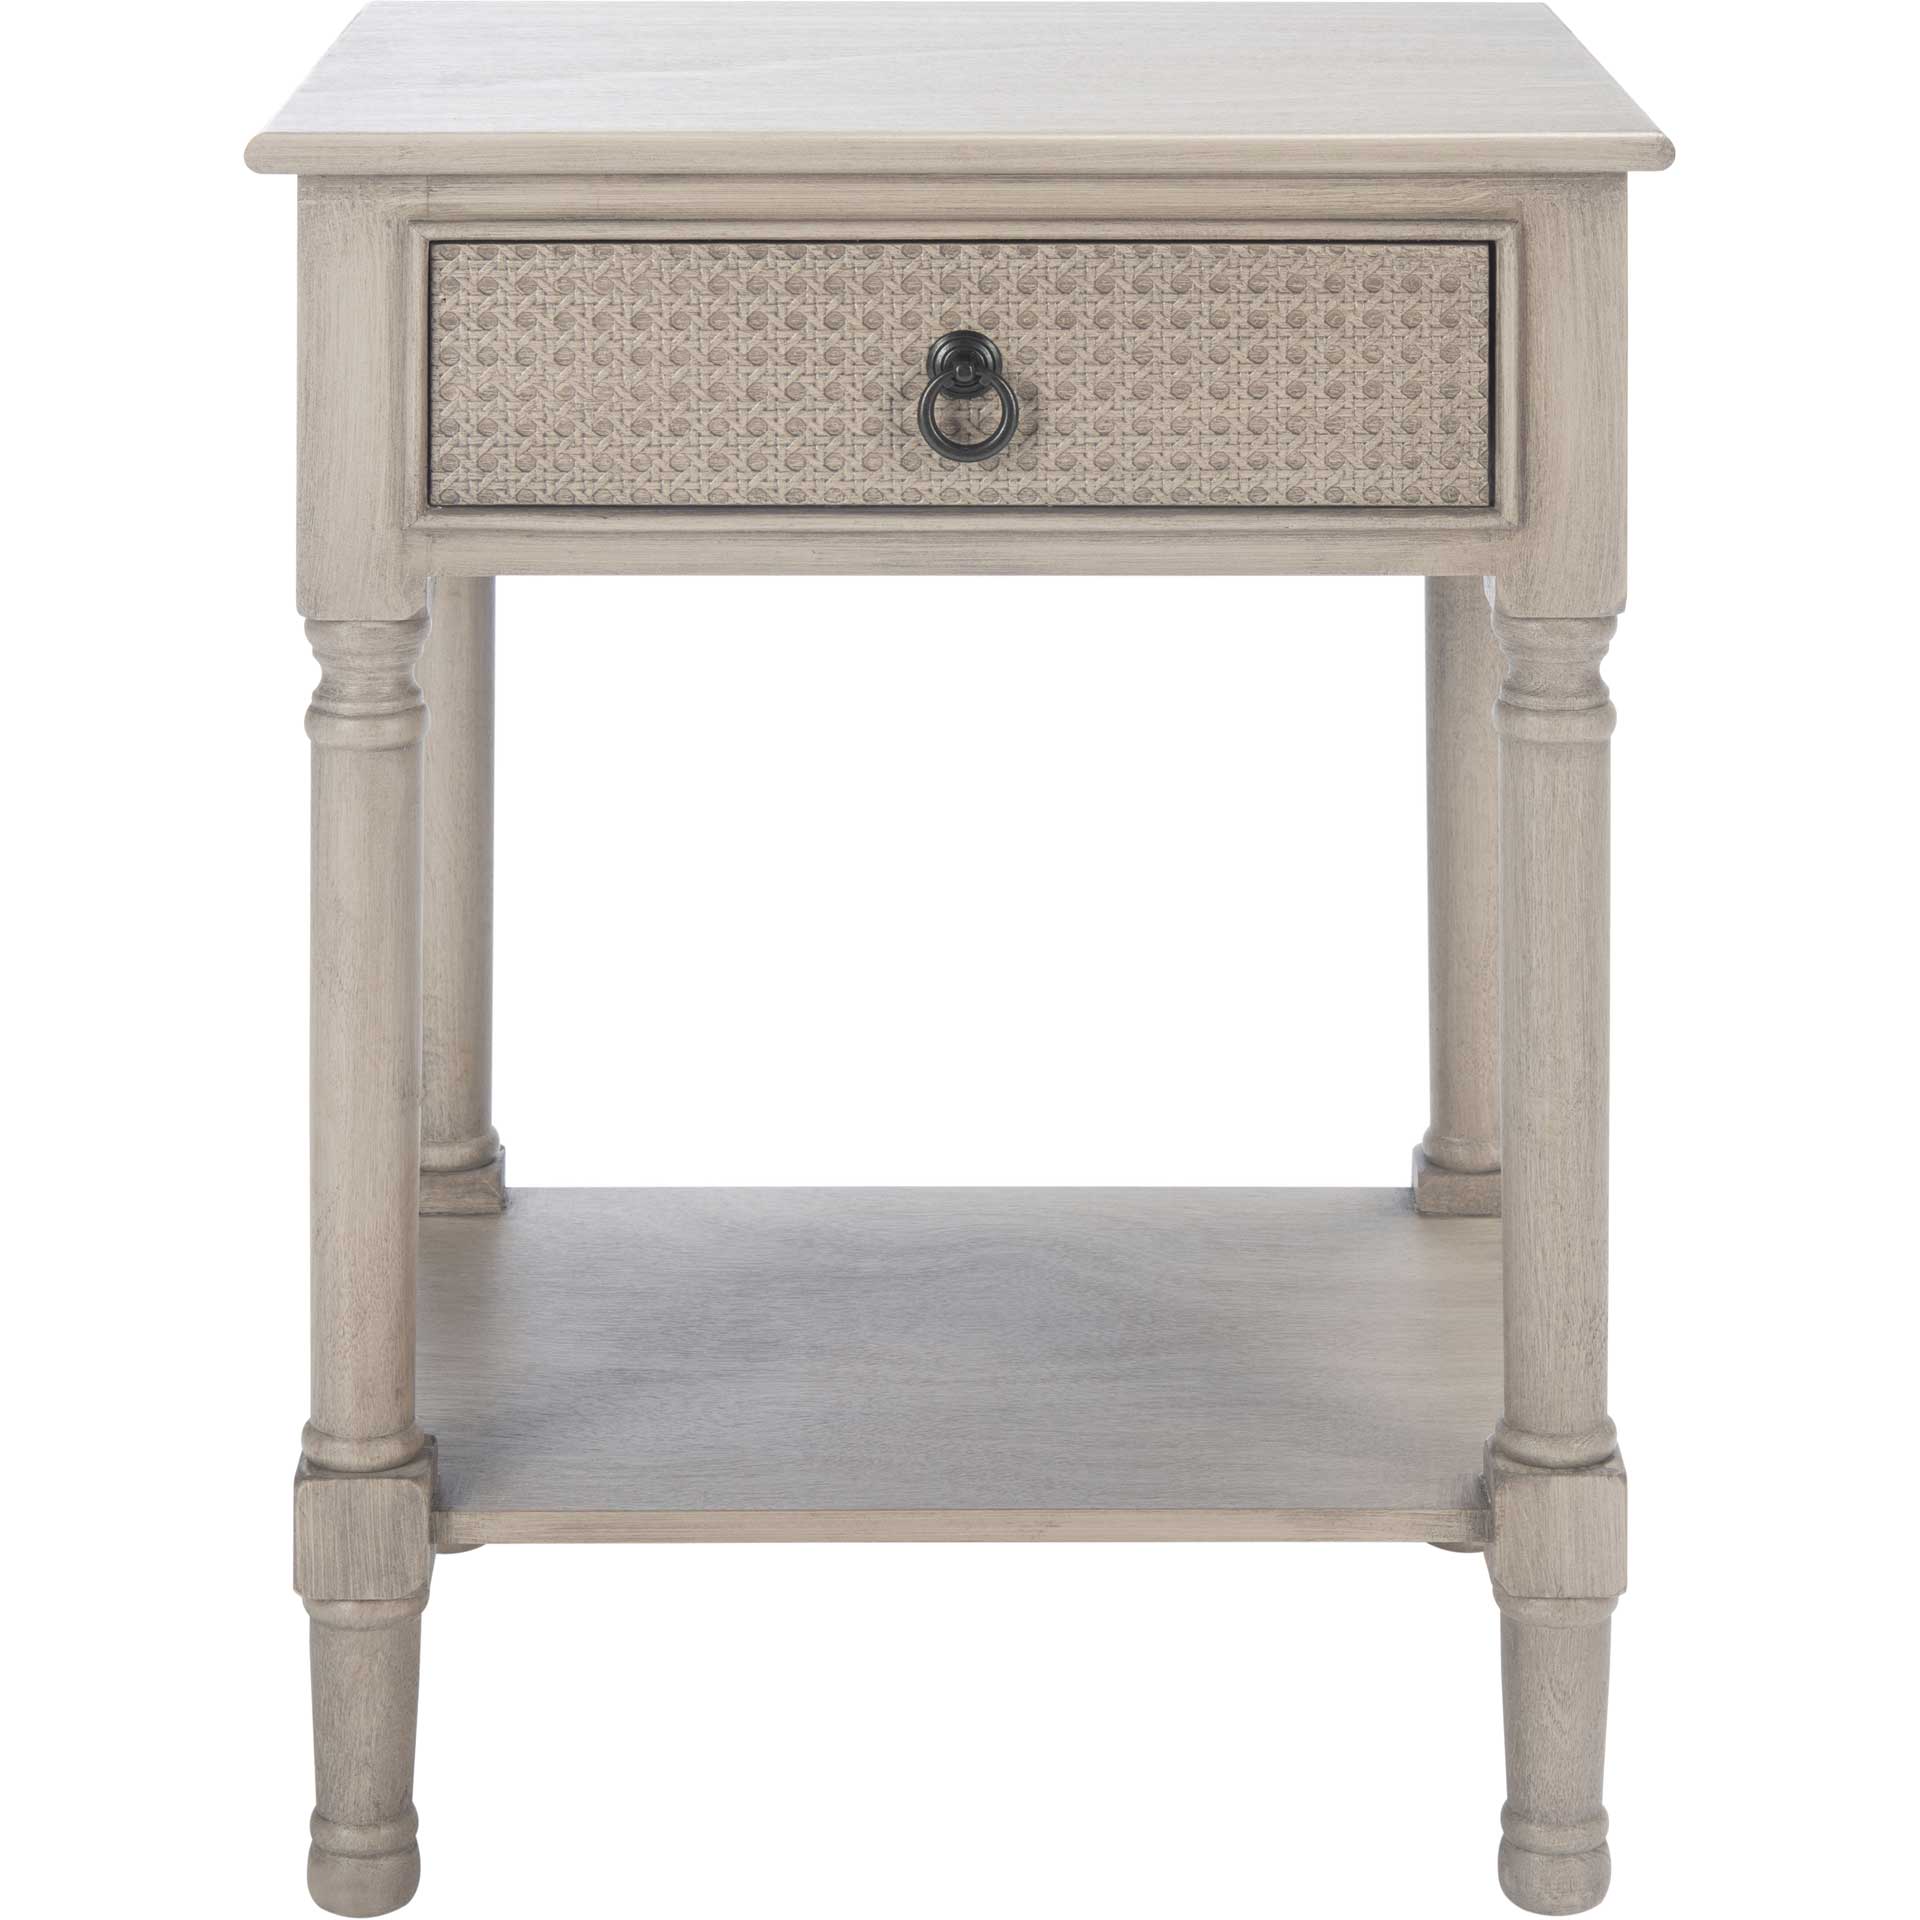 Hale 1 Drawer Accent Table Greige